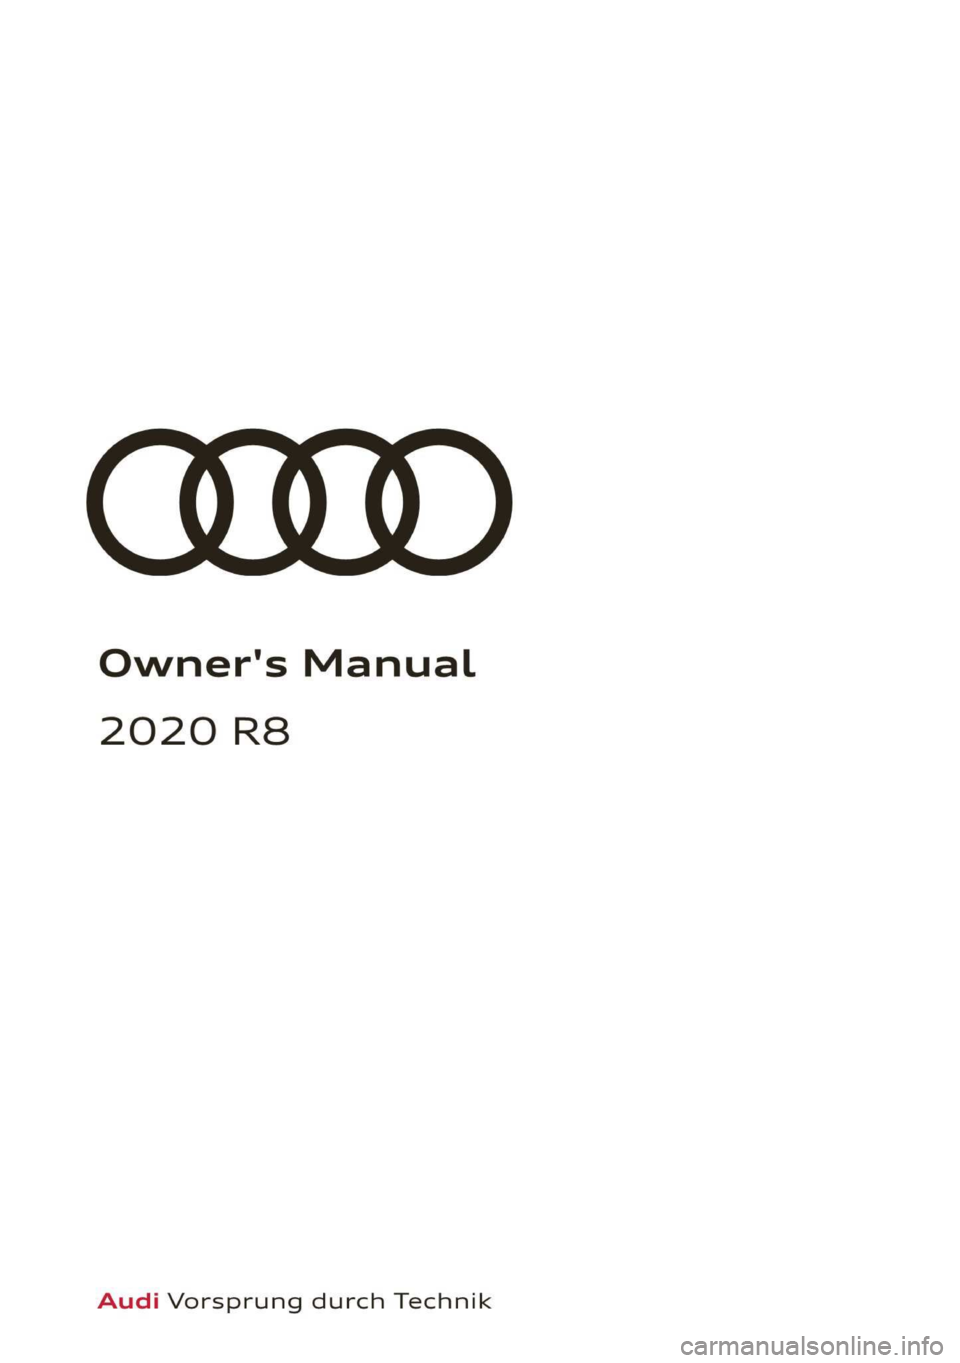 AUDI R8 COUPE 2020  Owners Manual Owner's Manual 
2020 R8 
Audi Vorsprung durch Technik  